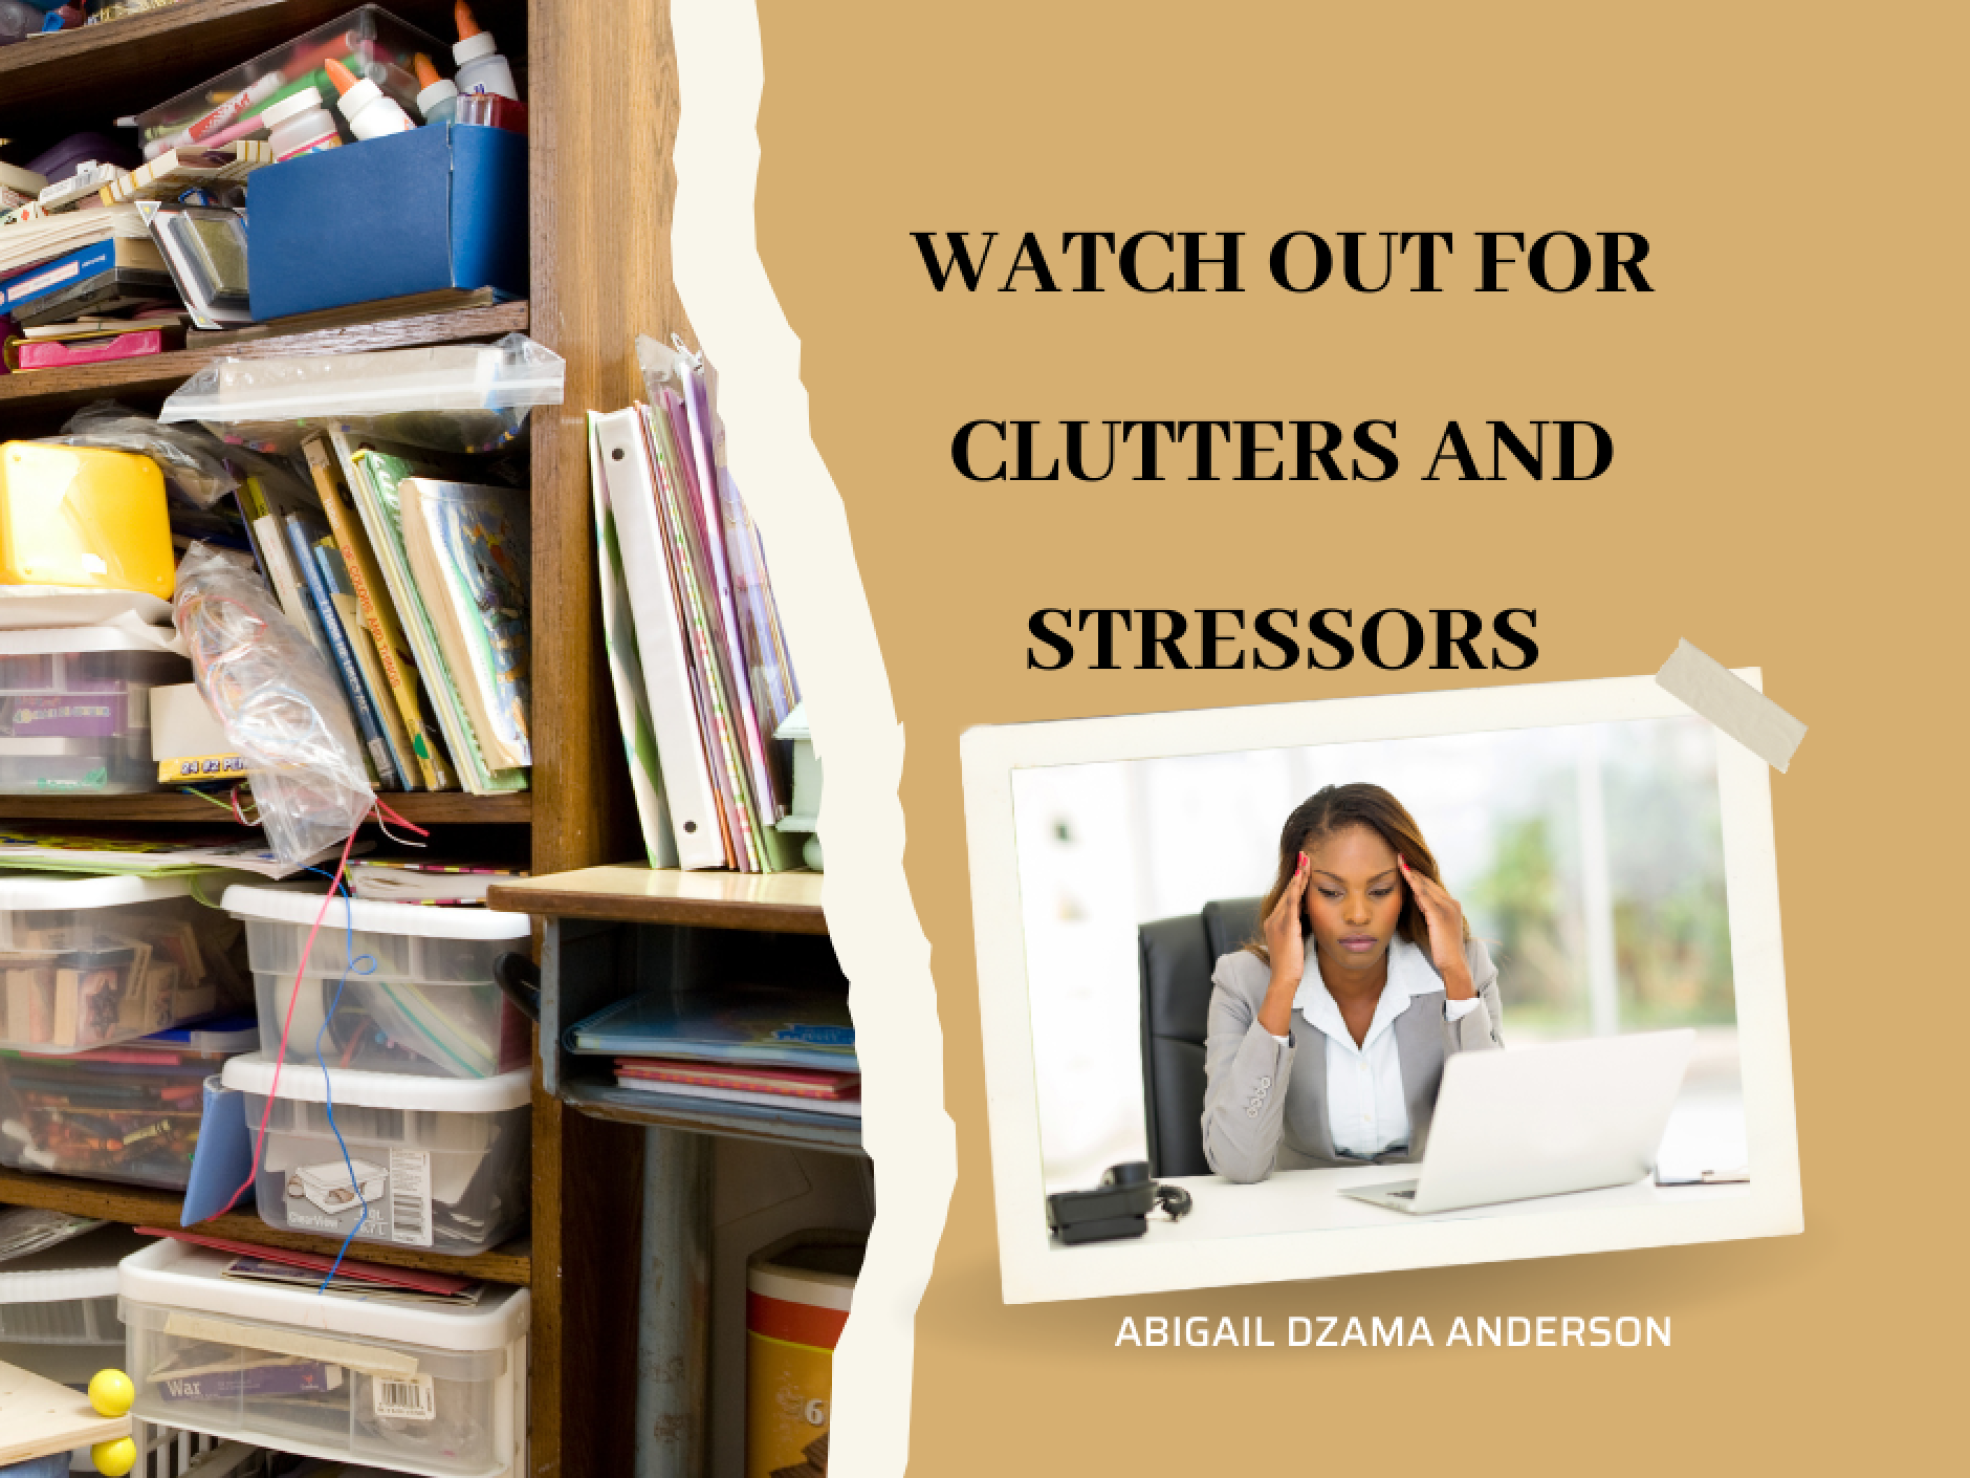 Watch Out for Clutters and Stressors